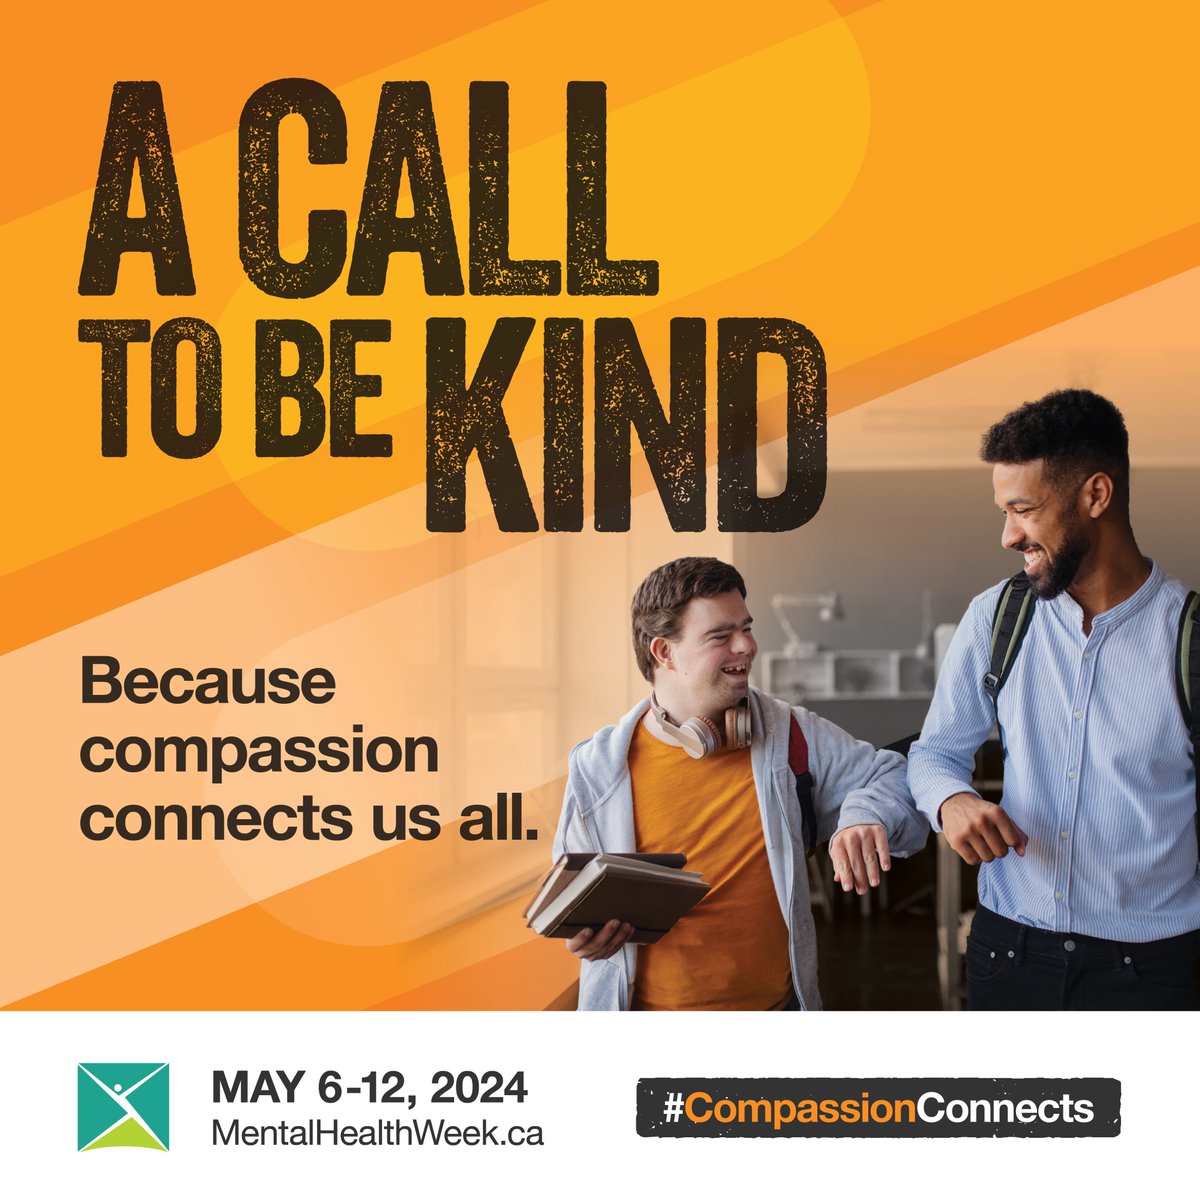 May 6th to 12th is Mental Health Week! Compassion isn't just about being kind to others, it's about extending that same kindness to ourselves. Visit mentalhealthweek.ca to learn more. #MentalHealthWeek #CompassionConnects